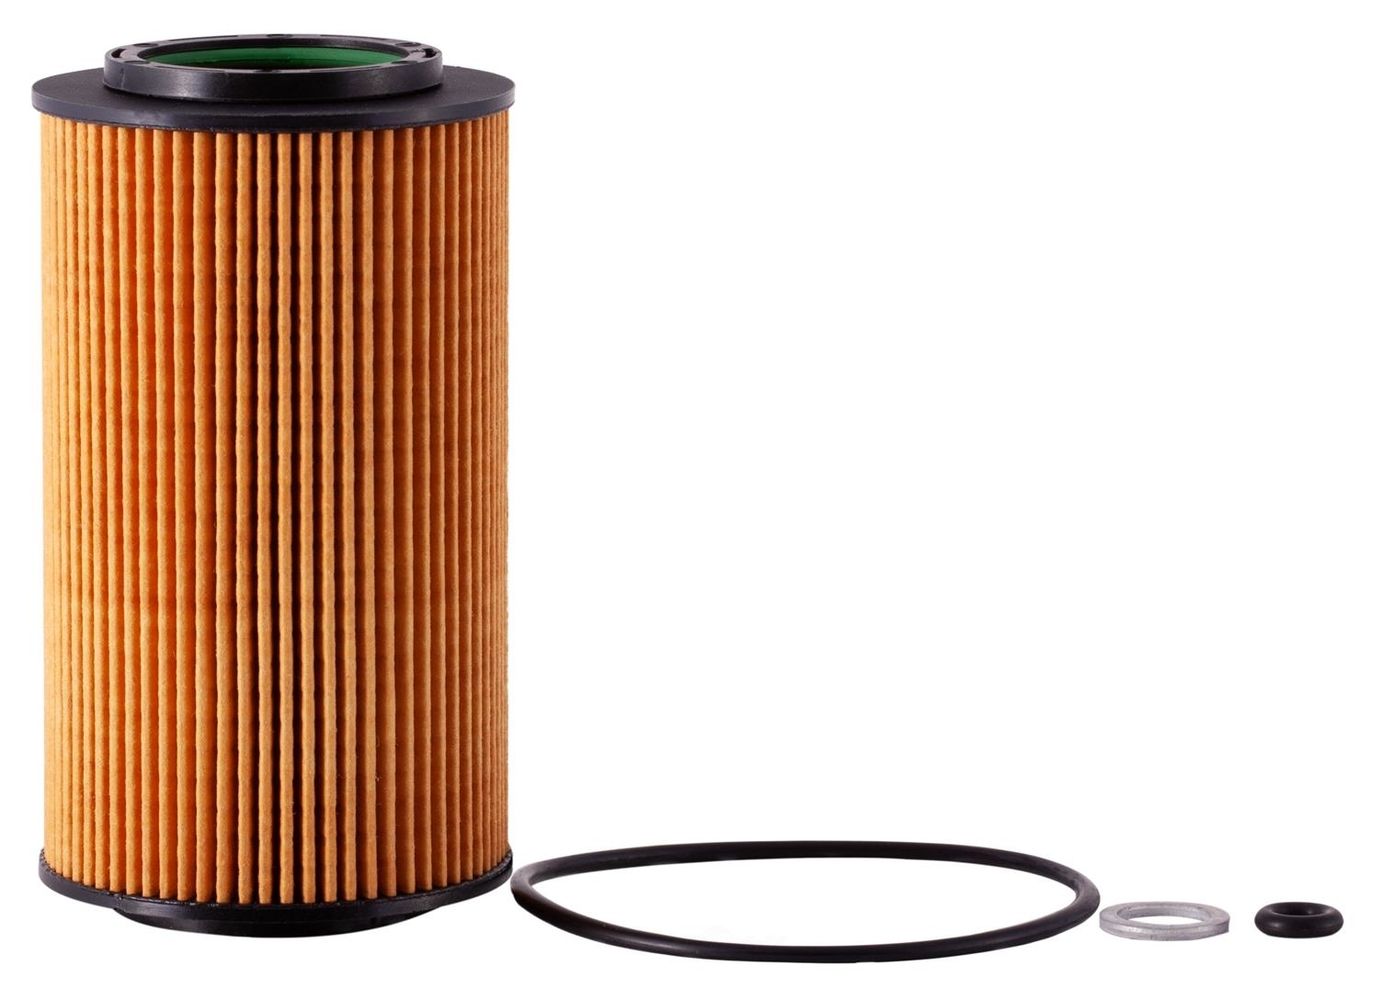 Premium PG5610EX Extended Life Oil Filter - image 1 of 5